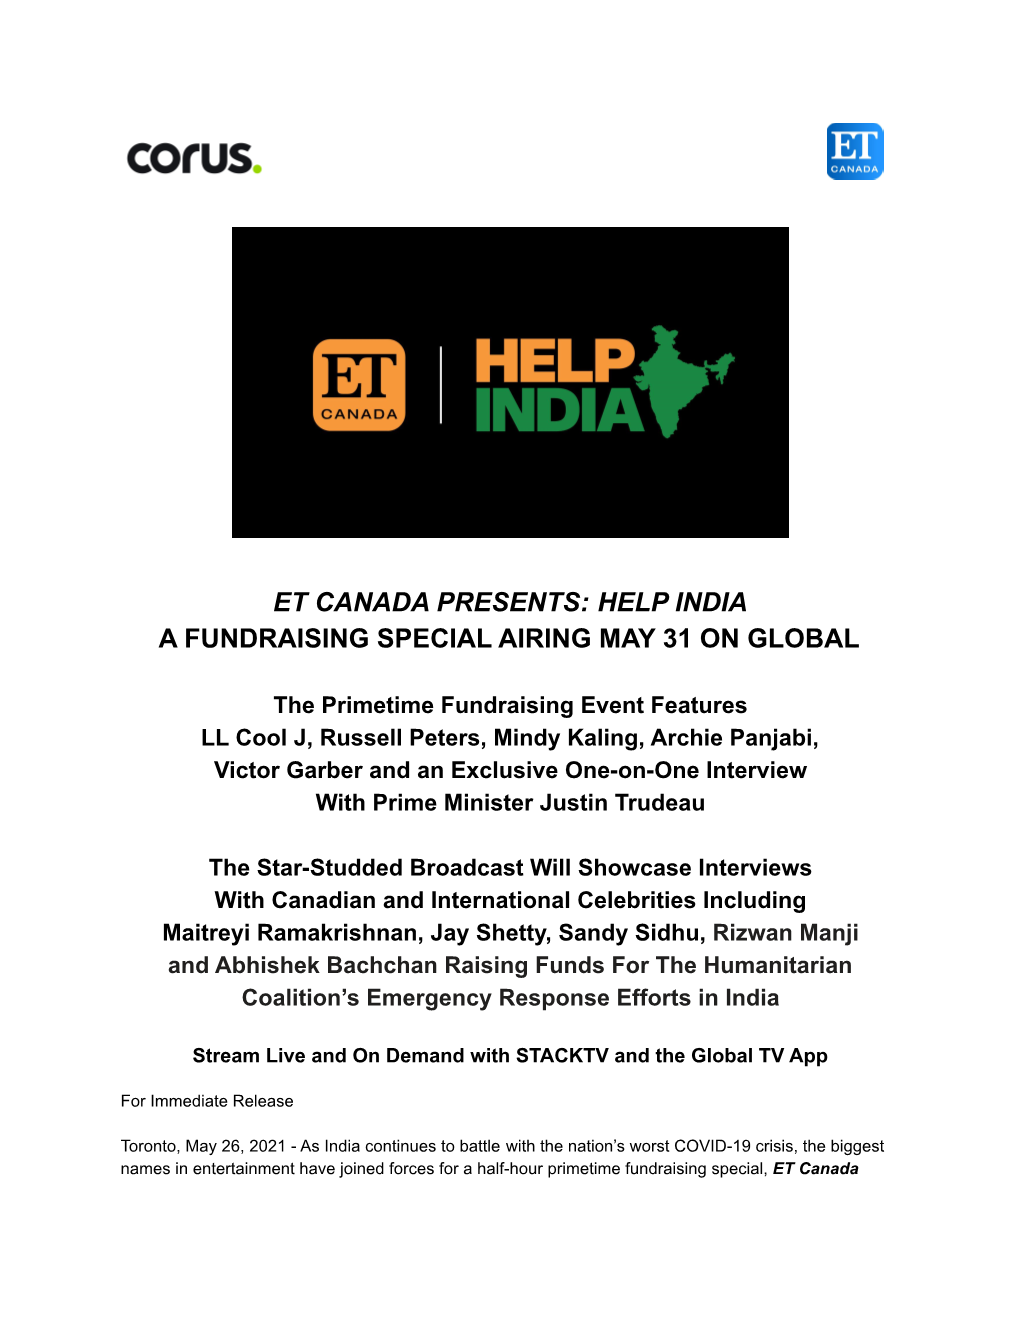 Et Canada Presents: Help India a Fundraising Special Airing May 31 on Global